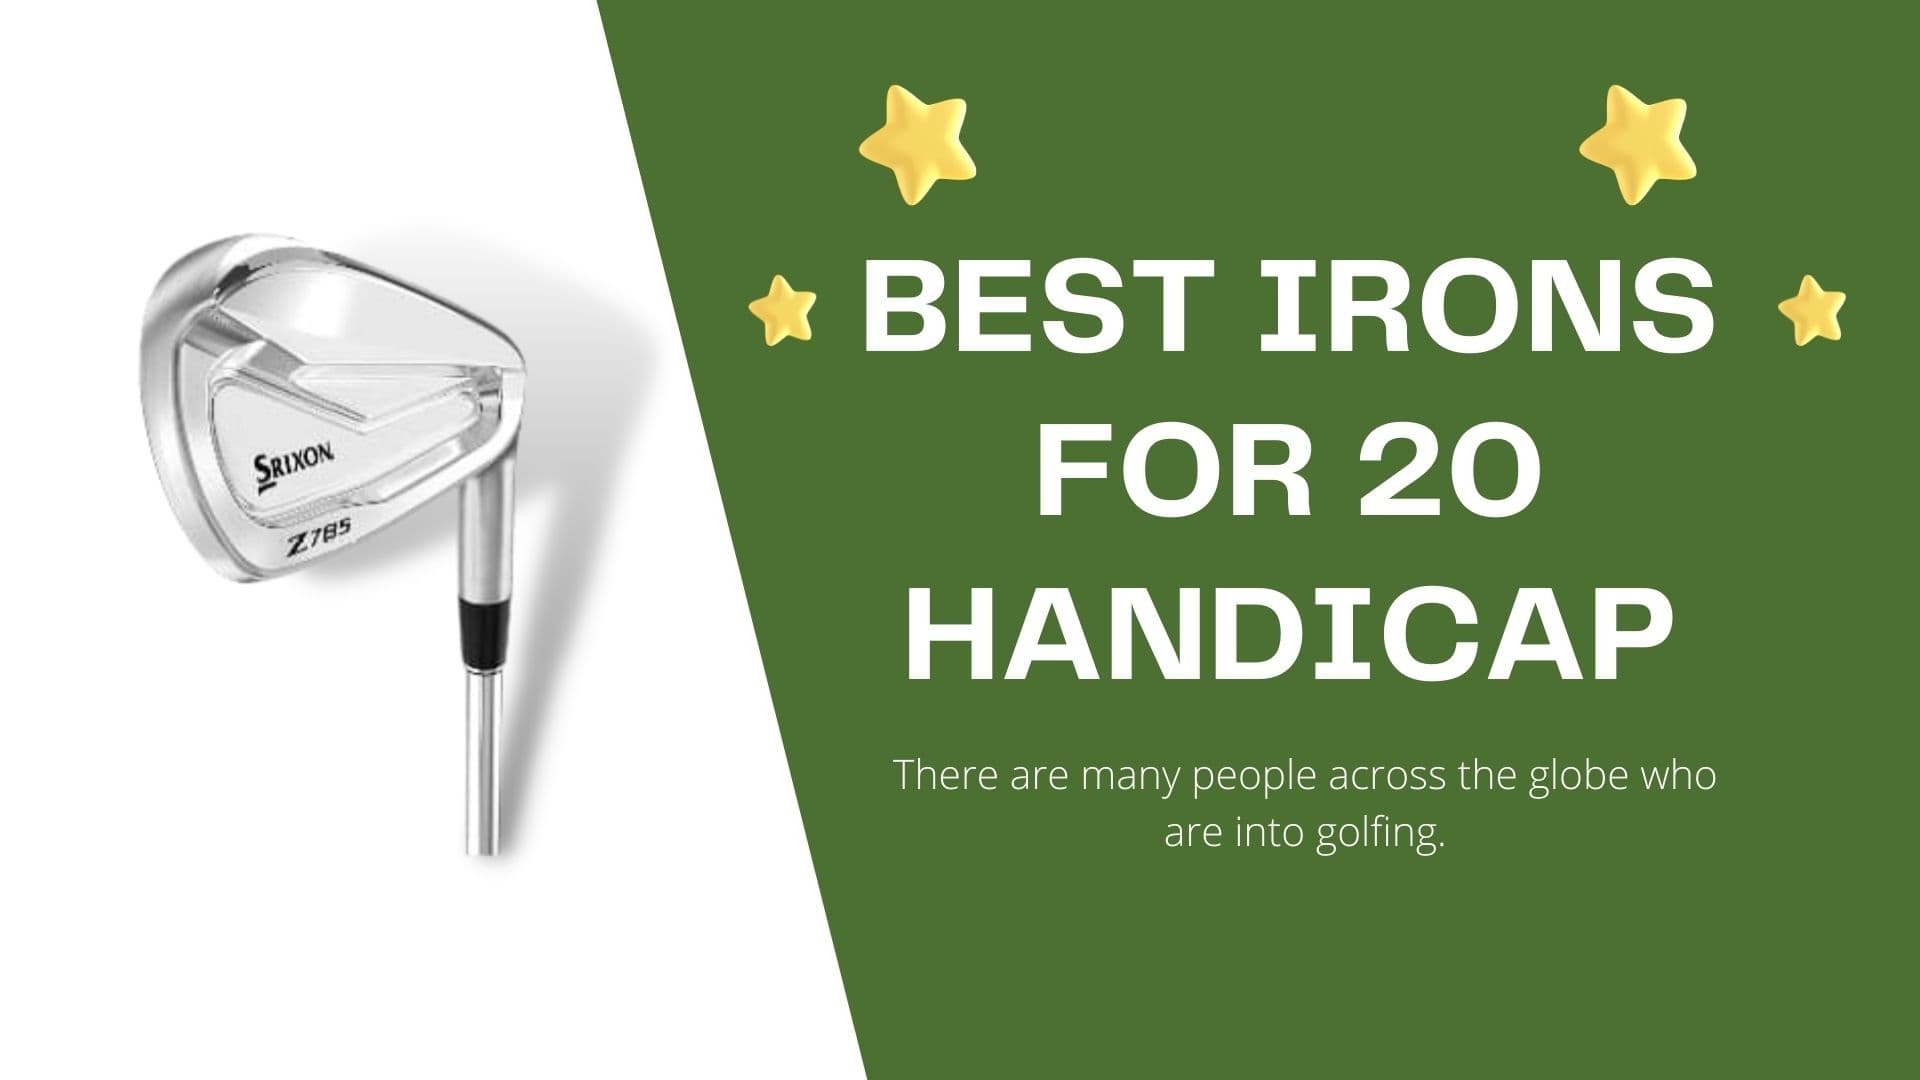 Top 5 Best Irons For 20 Handicap 2022 Pro's Reviews (Updated)